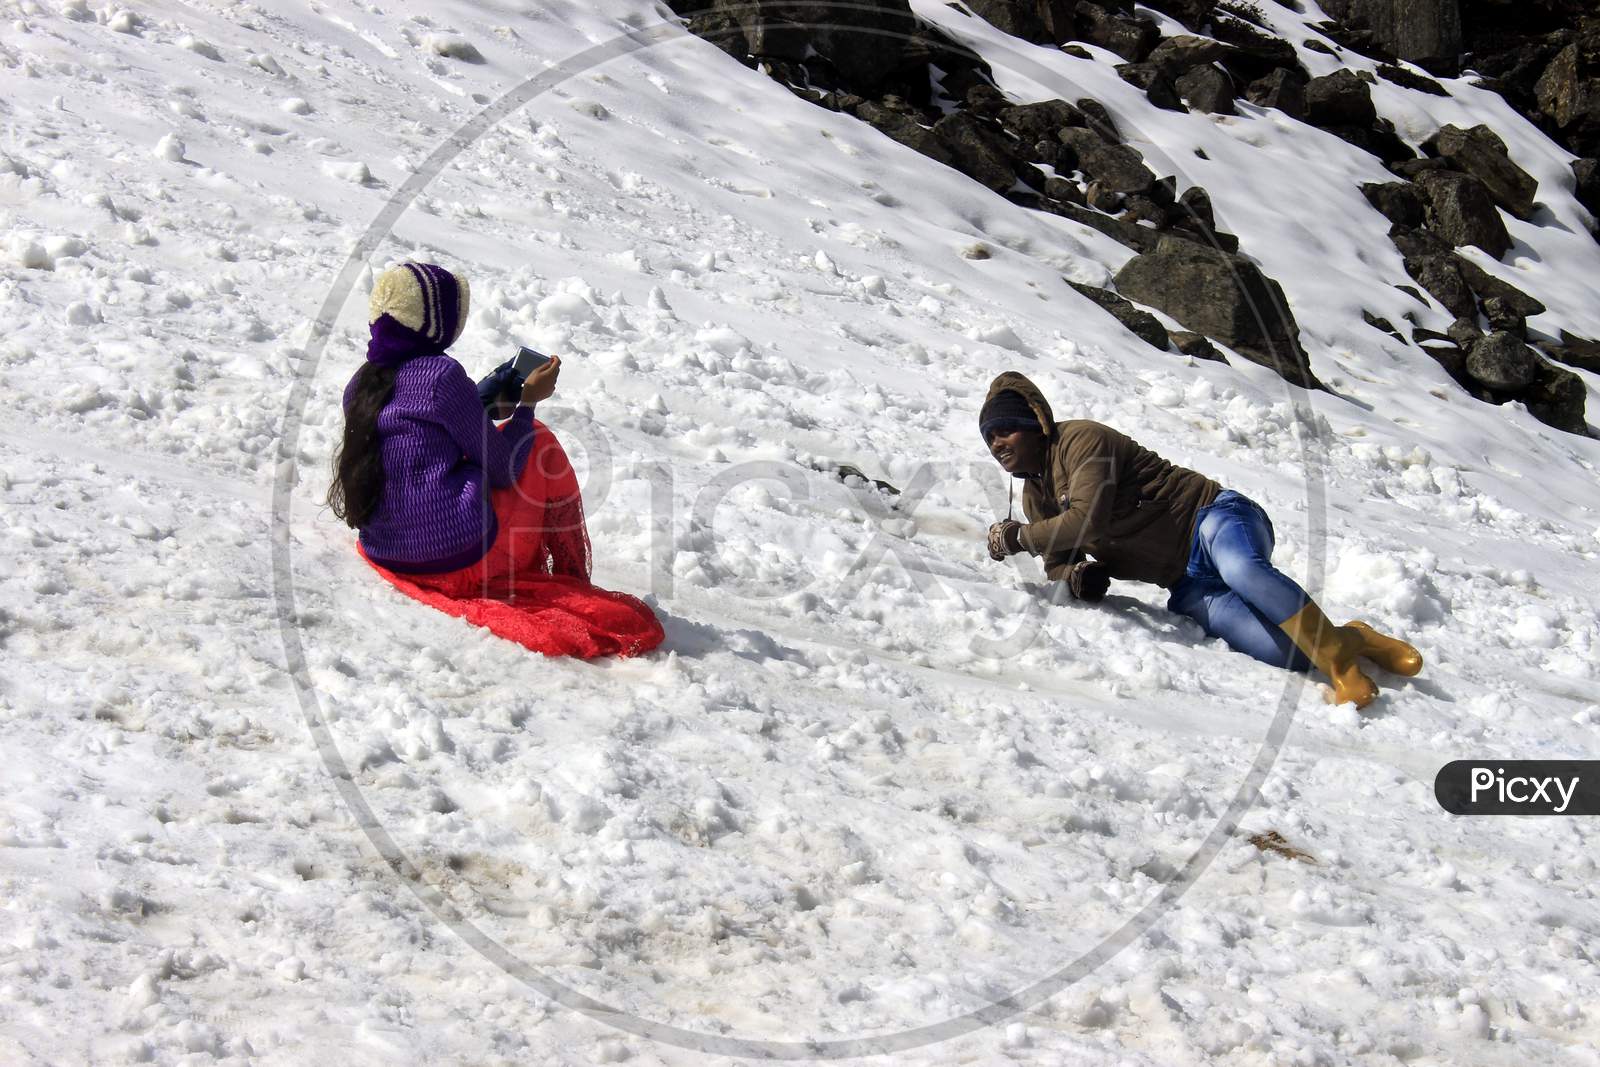 People clicking photos by sitting on a Snow Capped Mountain in Sikkim